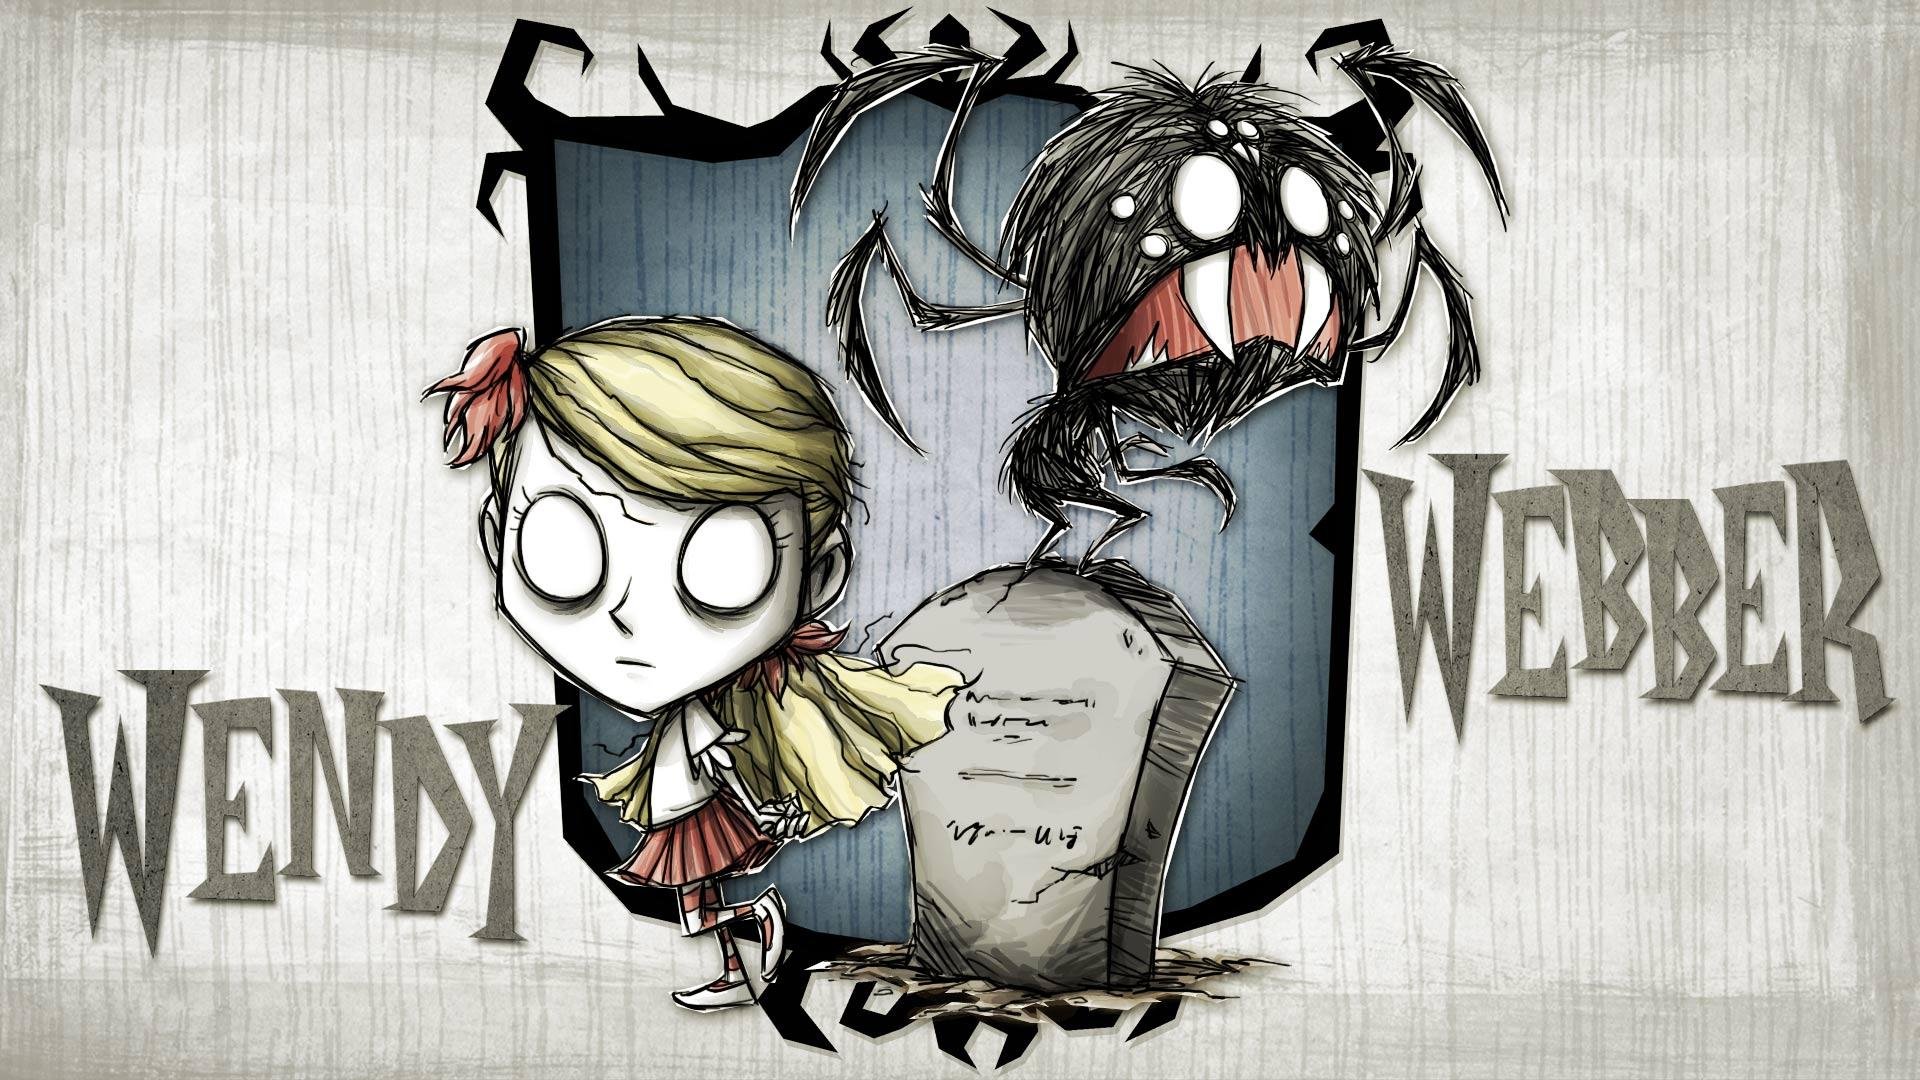 Taches dont. Вебер don't Starve. Don't Starve together Веббер арт.